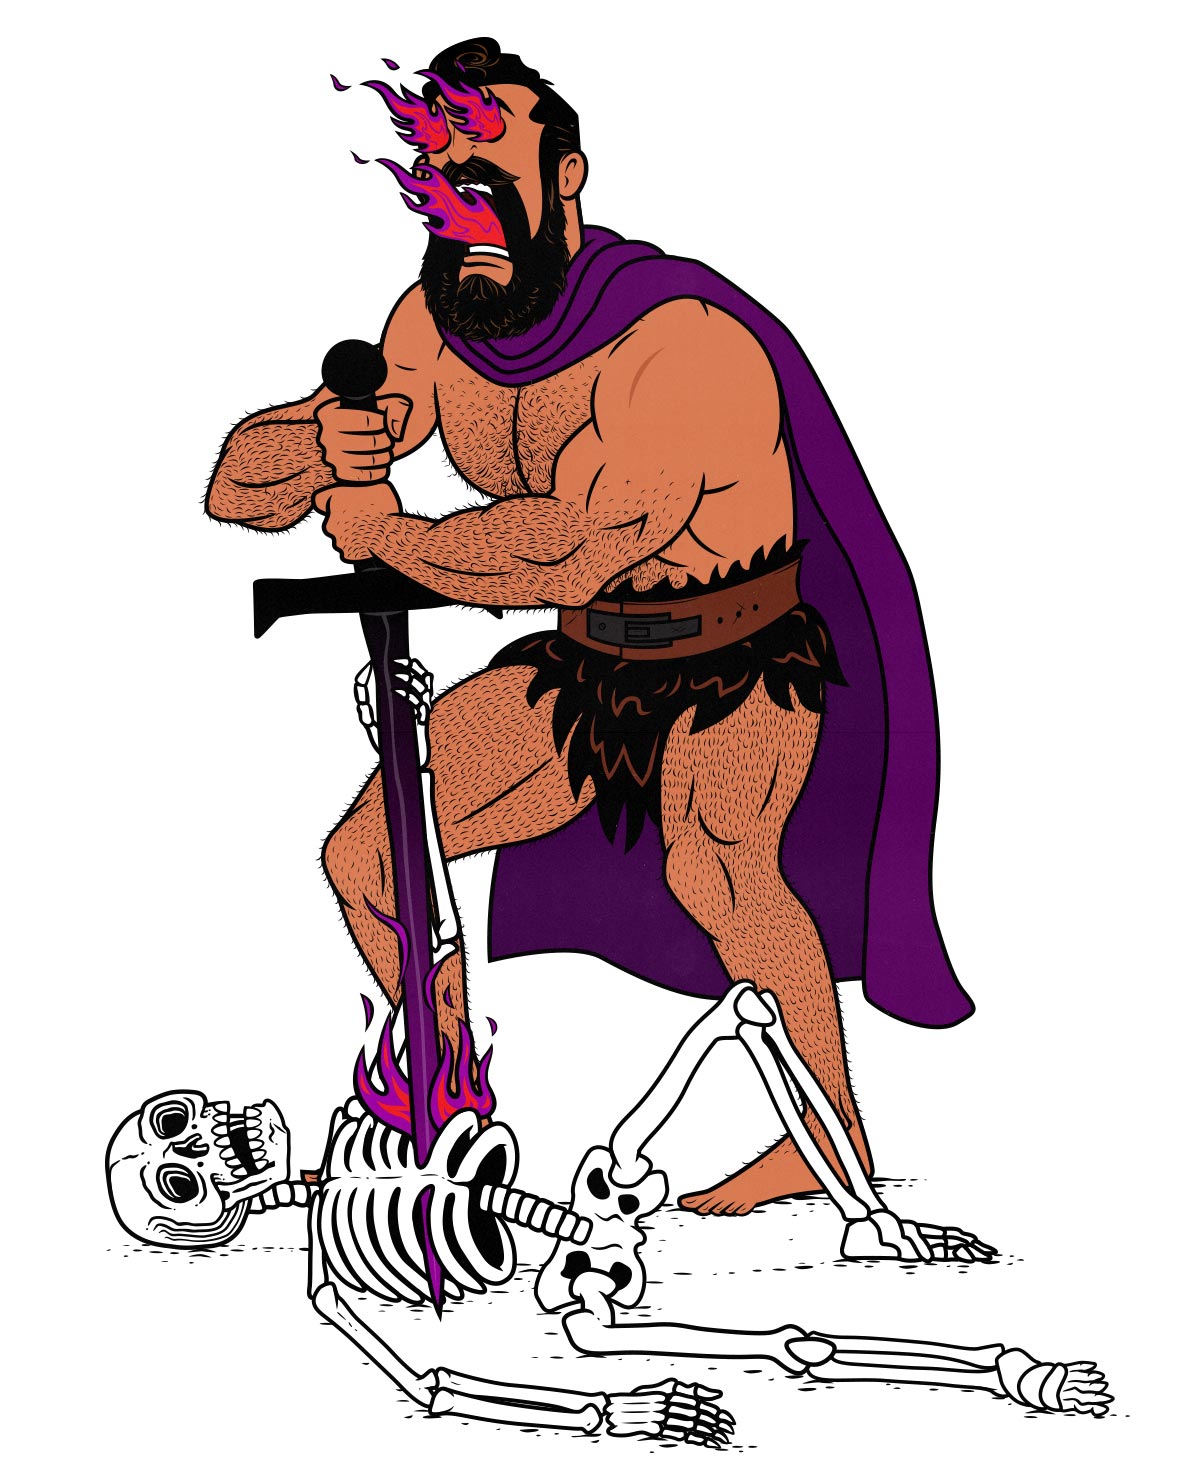 Illustration of a barbarian weight lifter hyped up on a pre-workout supplement.